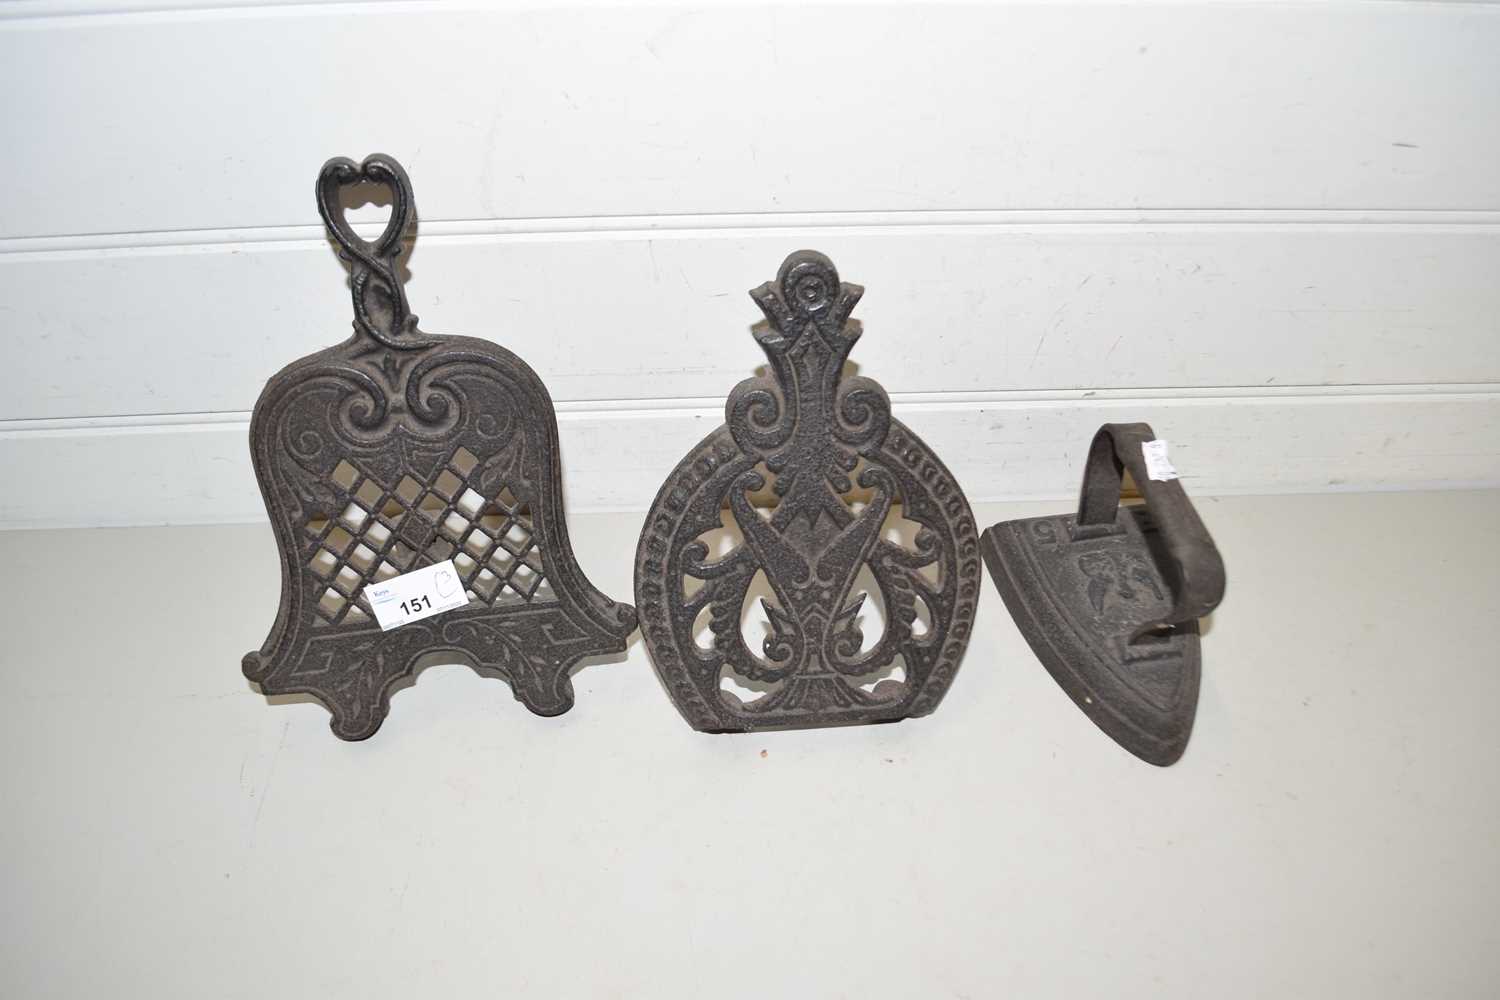 Two cast iron trivets and a flat iron